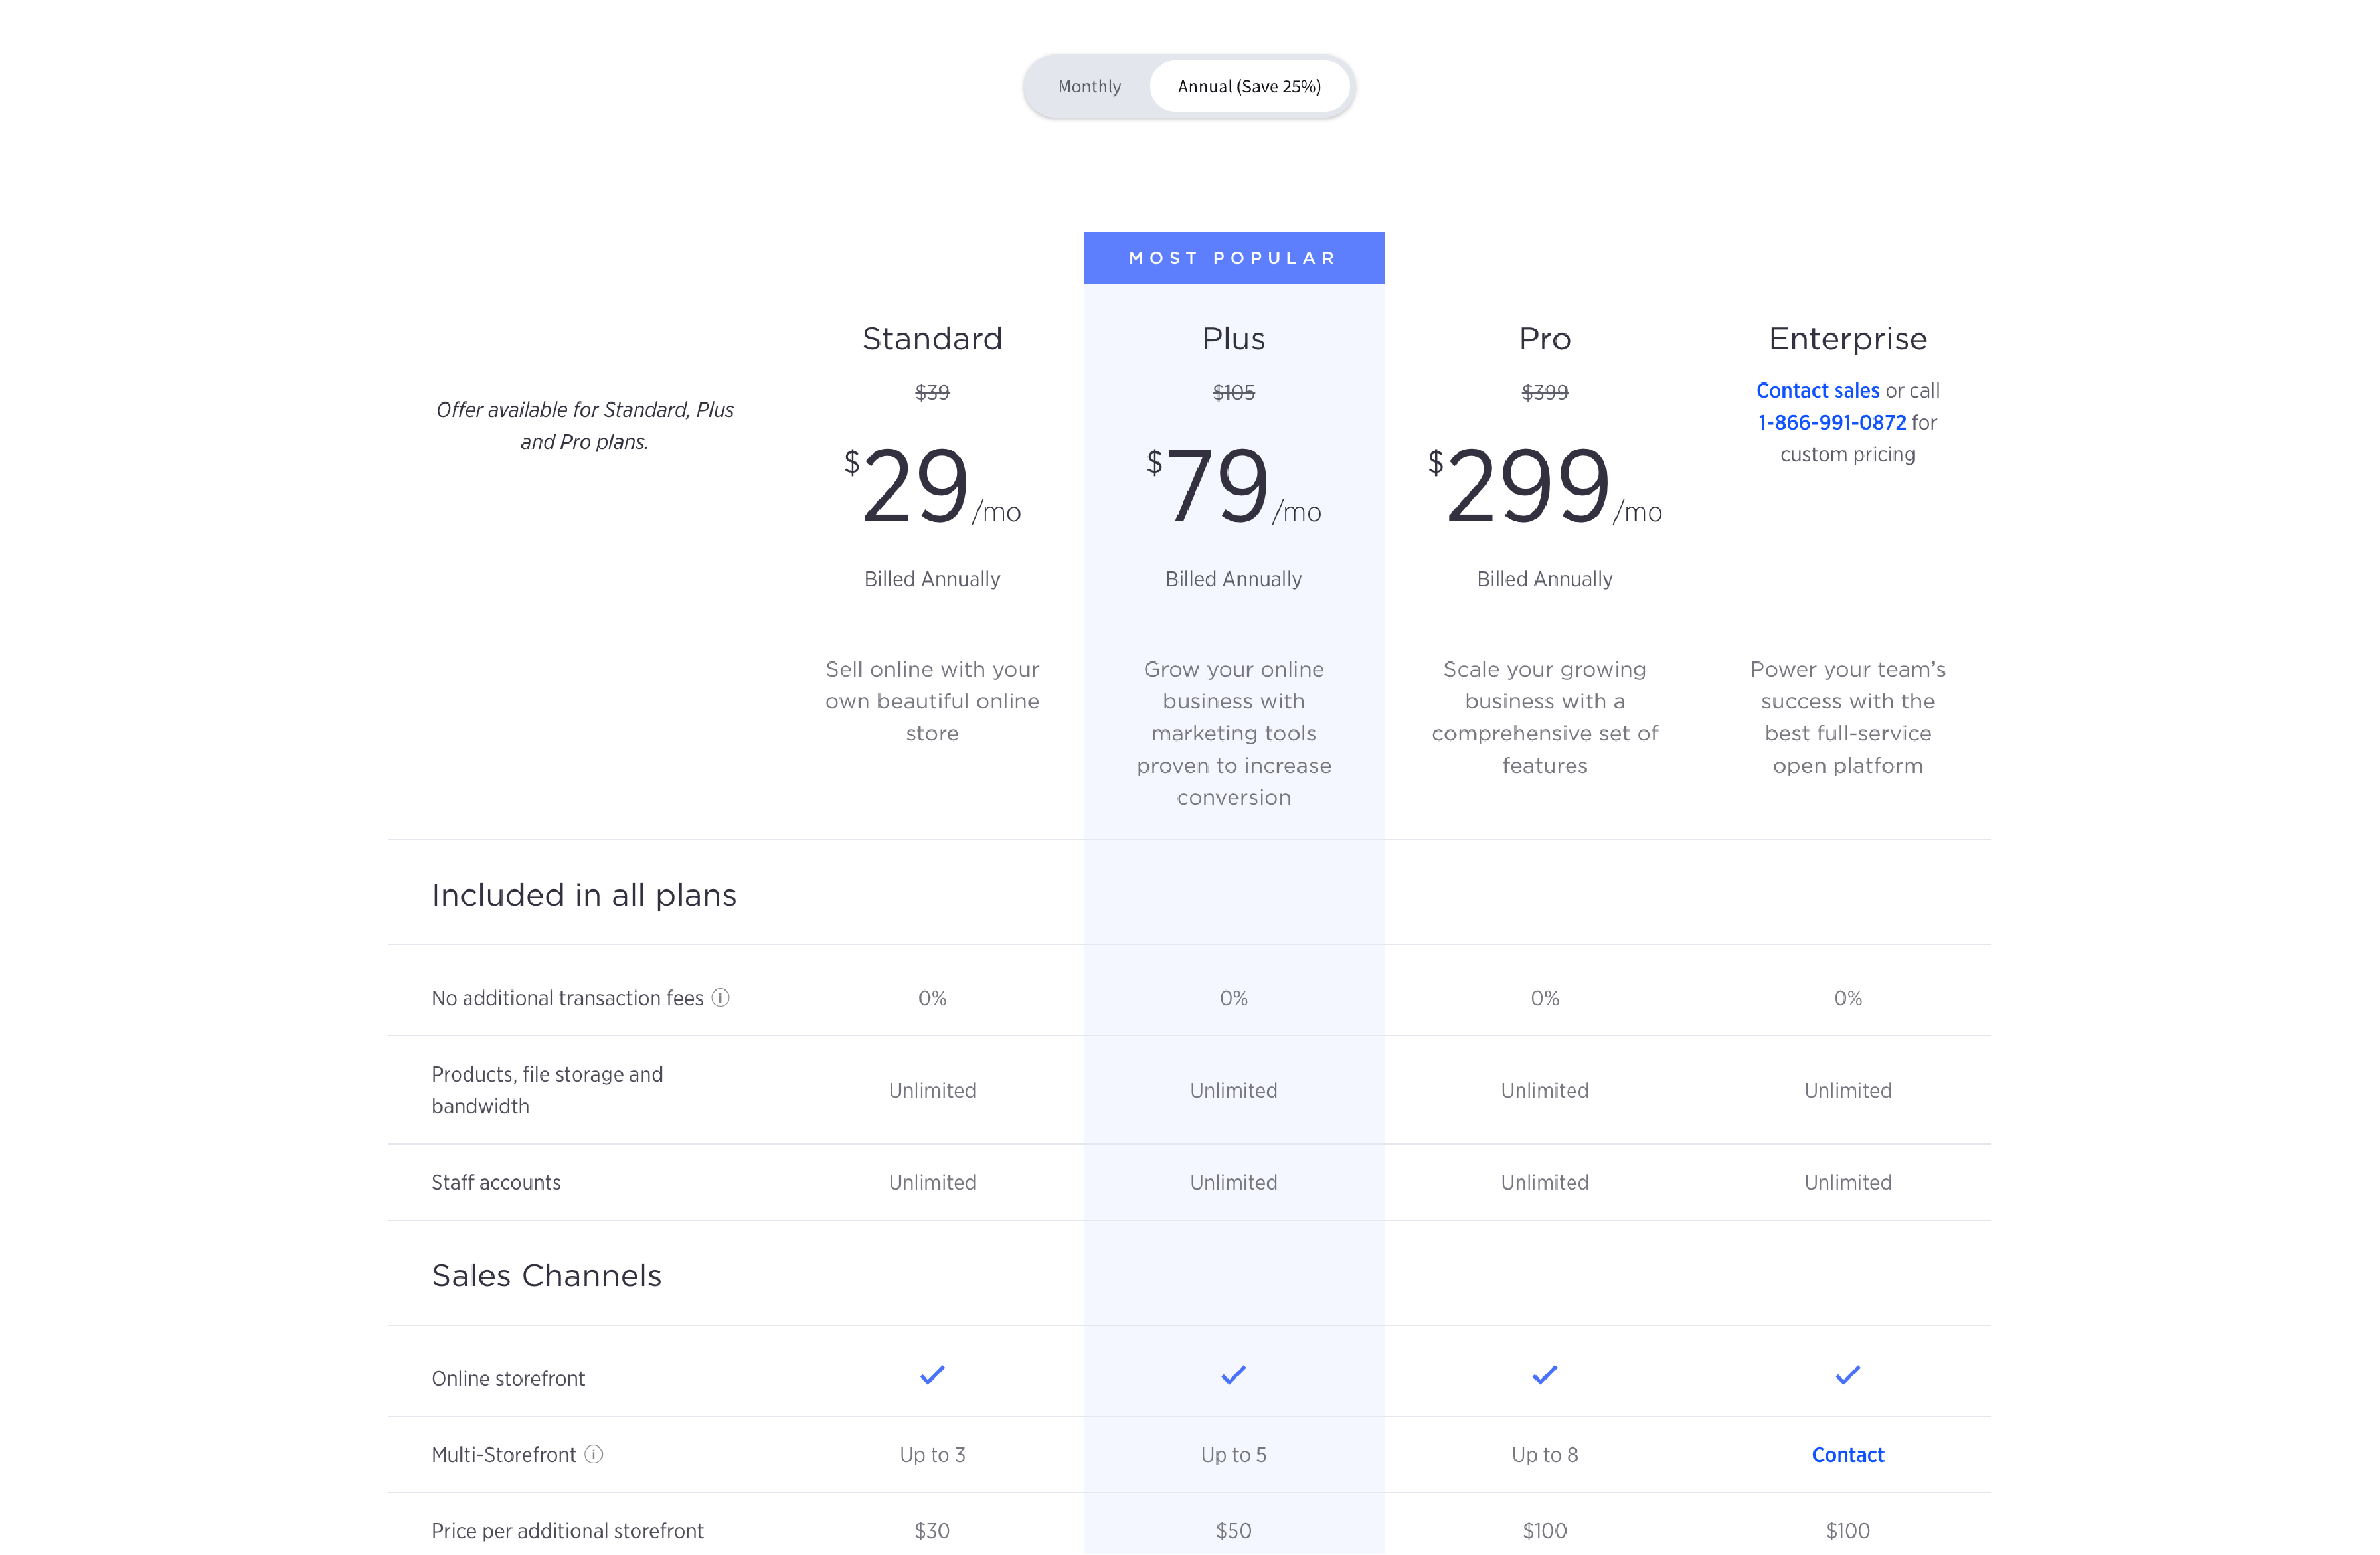 BigCommerce pricing plans for eCommerce businesses